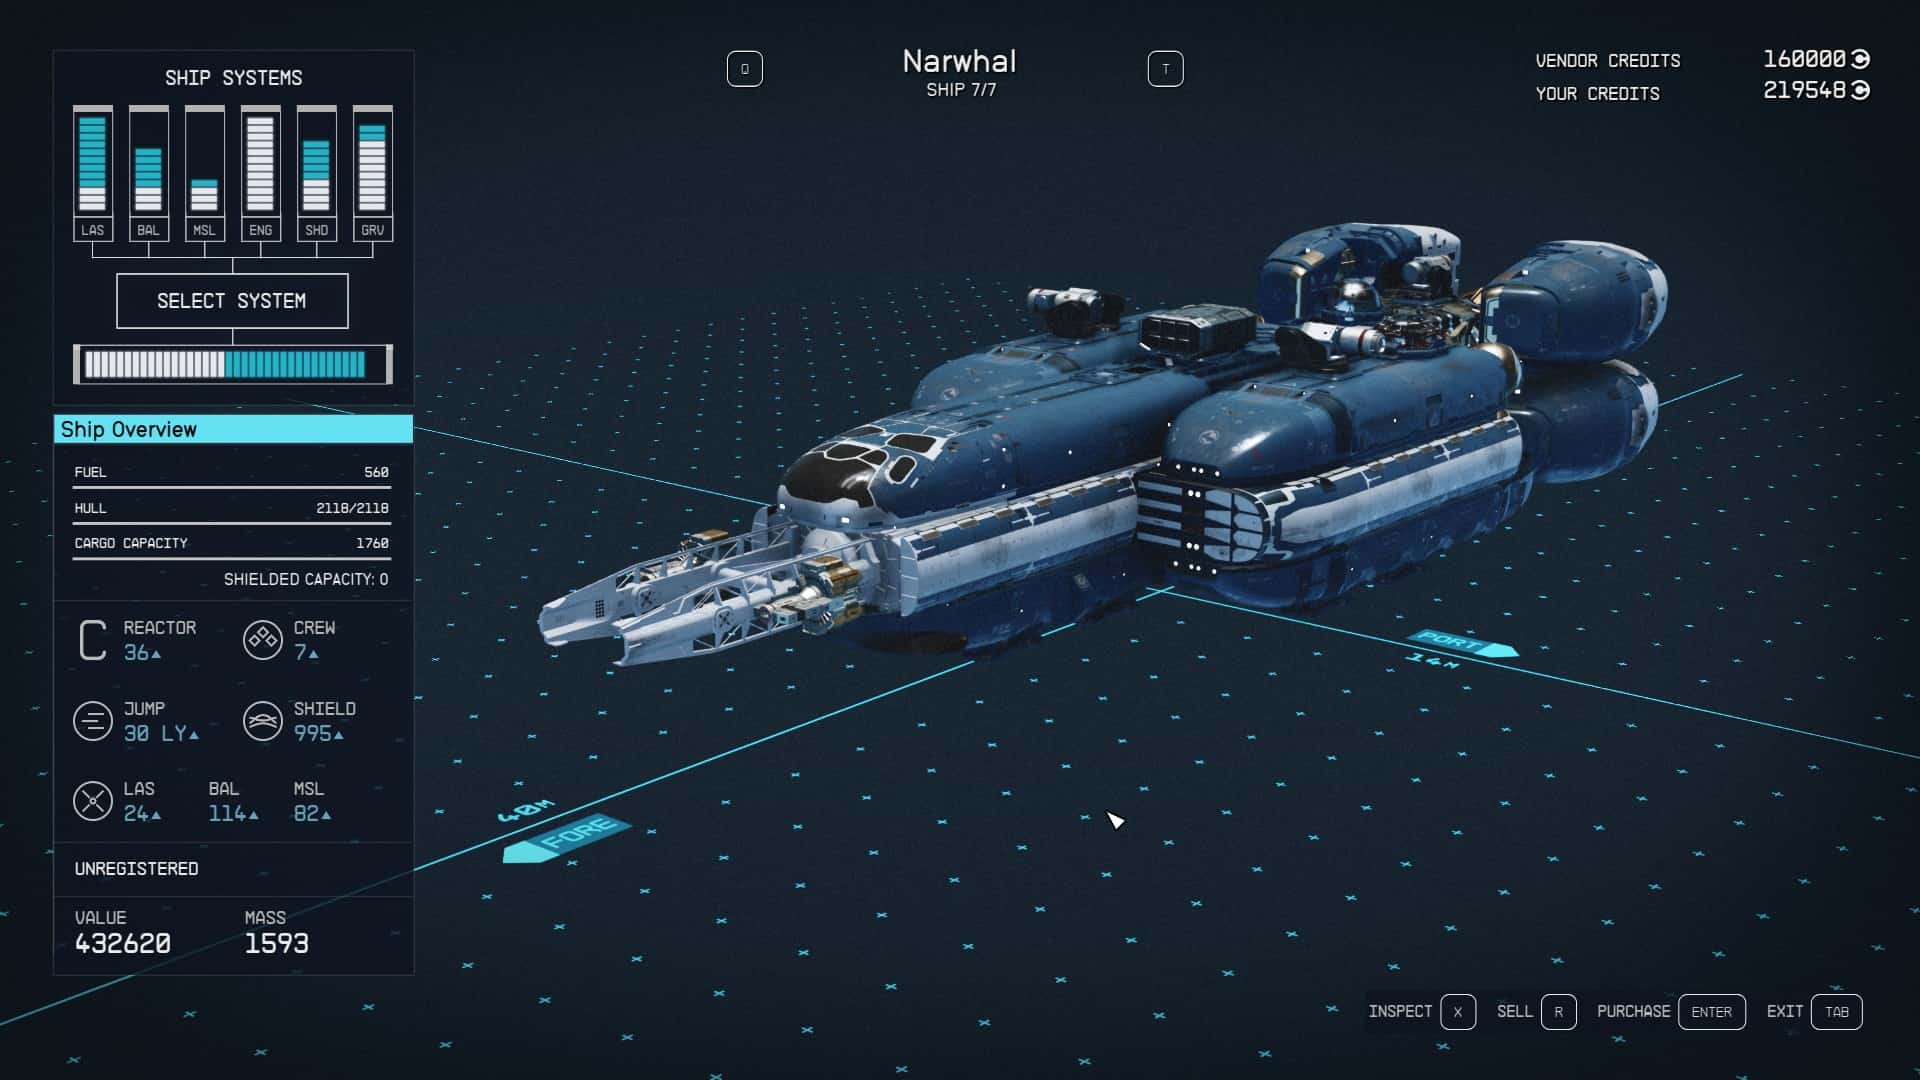 Best Starfield ships: The Narwhal ship in Starfield.